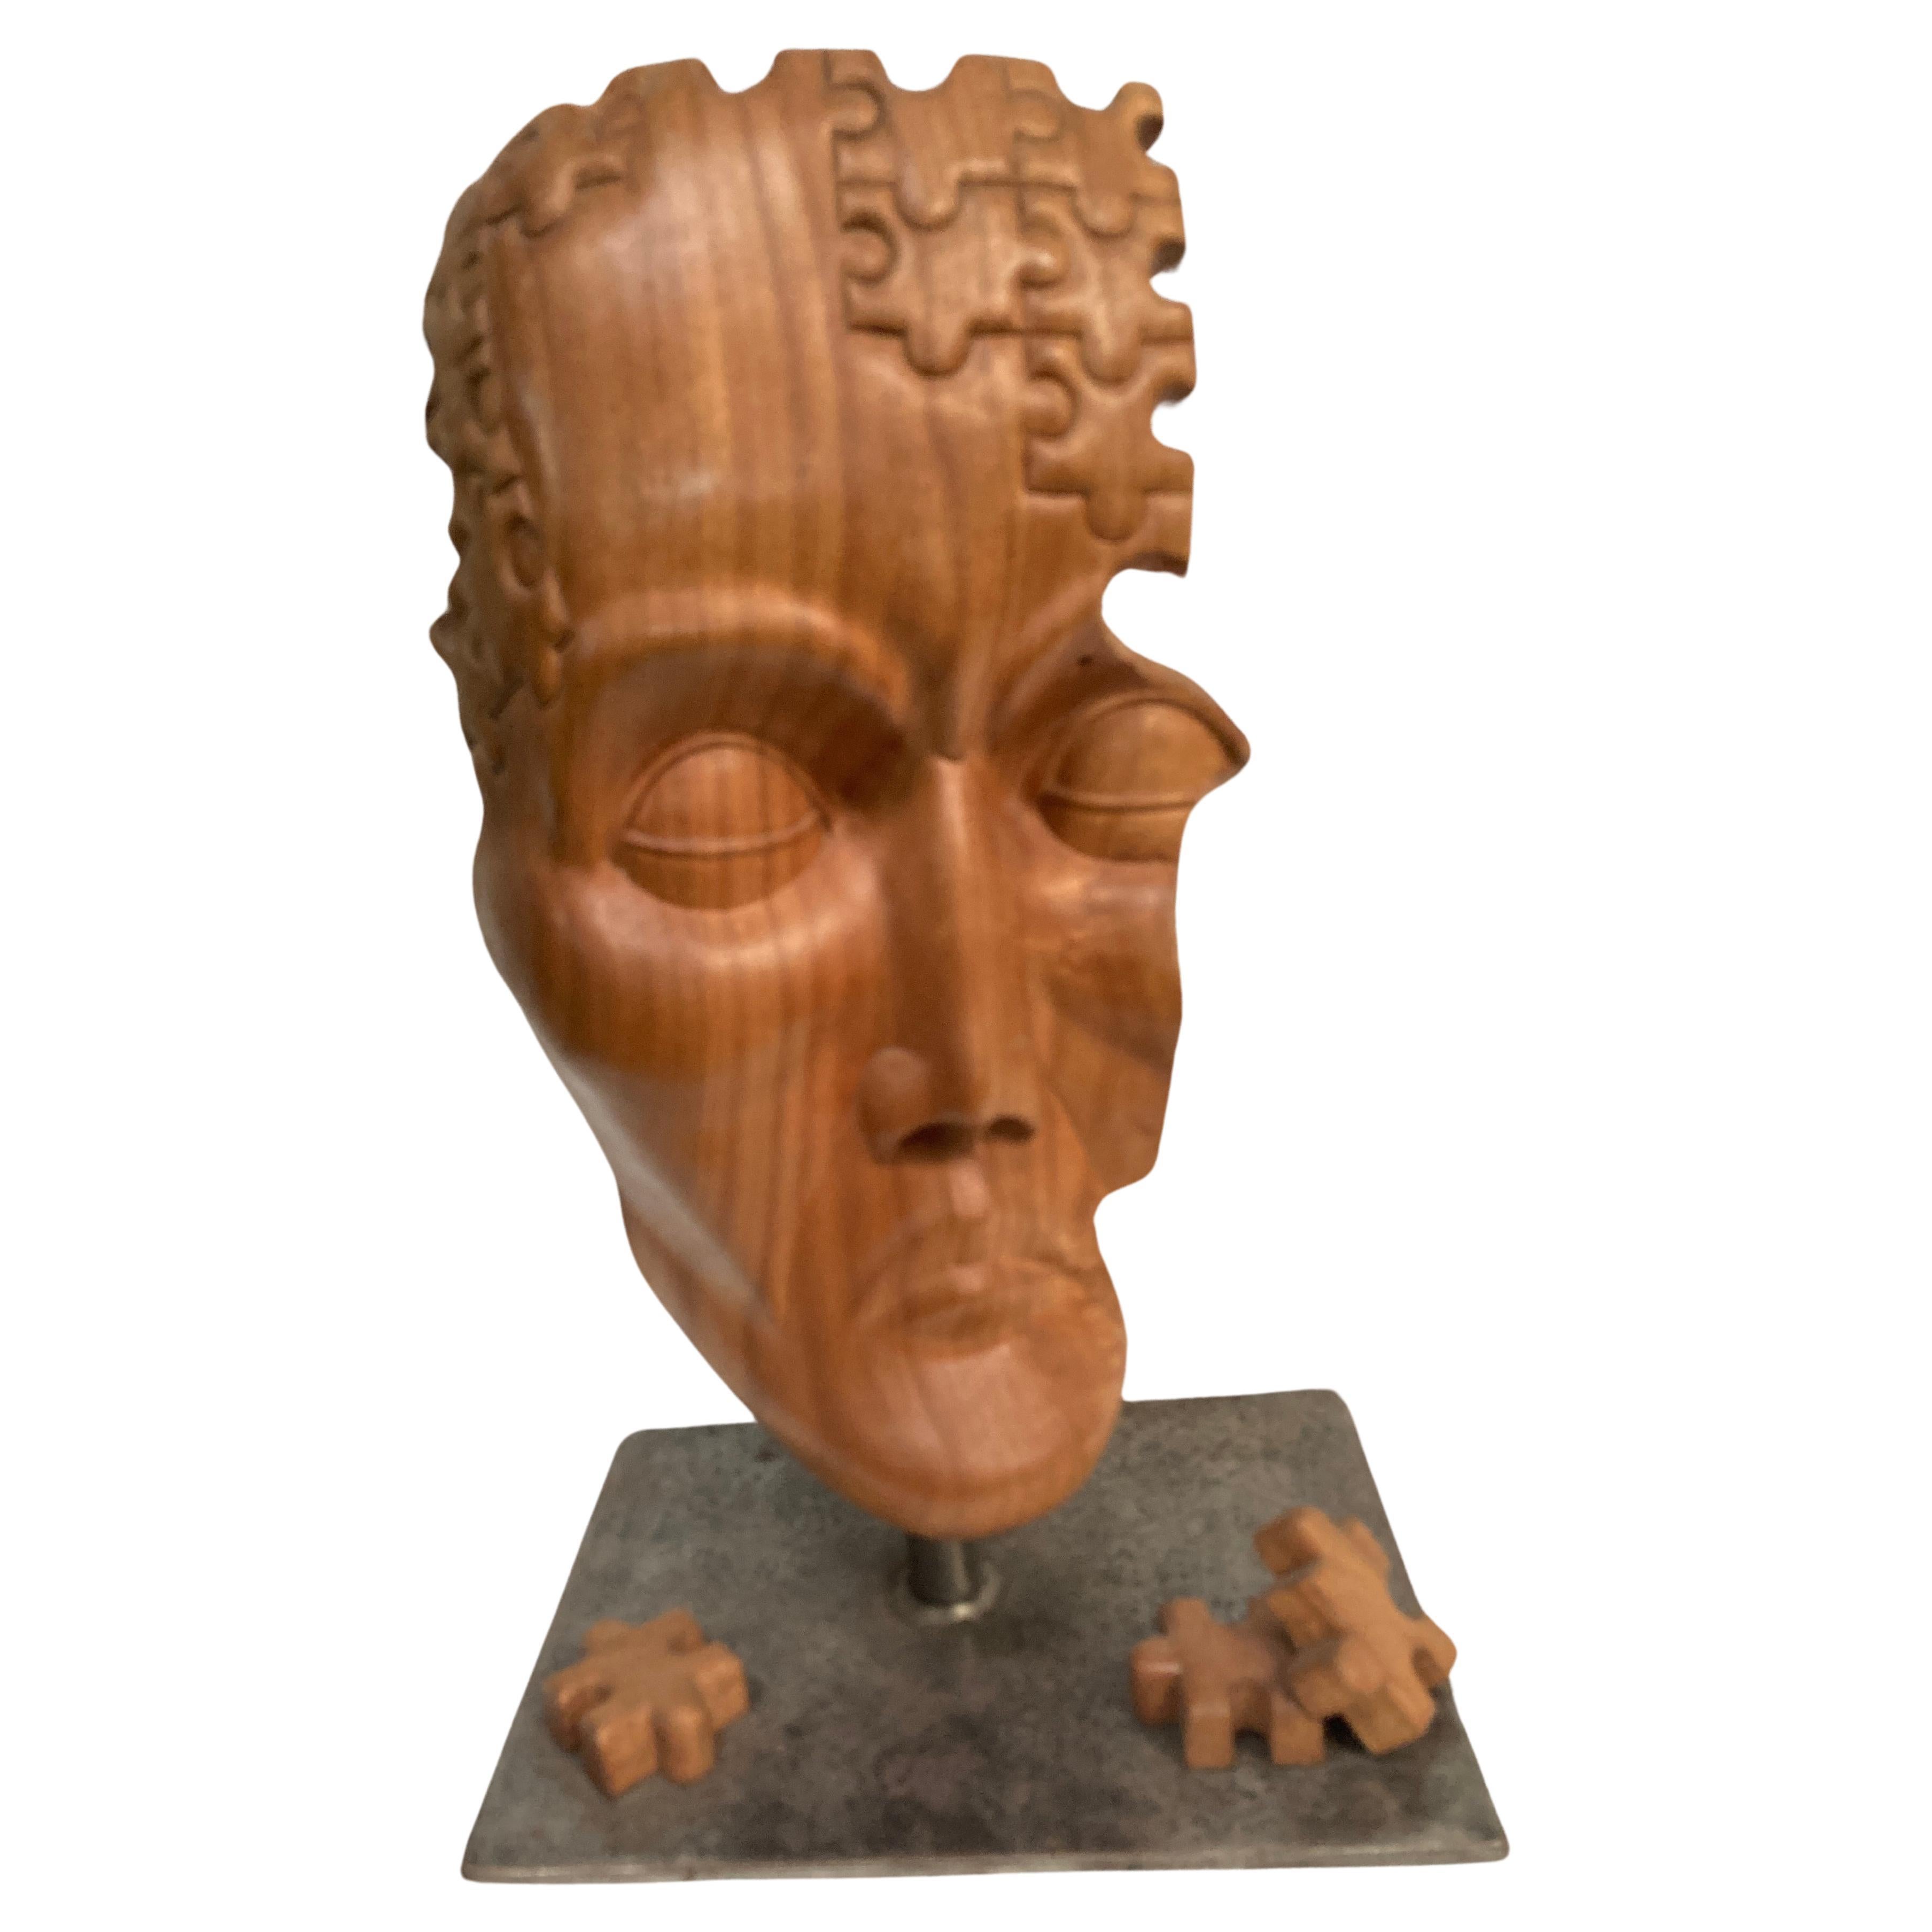 Carved wood abstract head sculpture